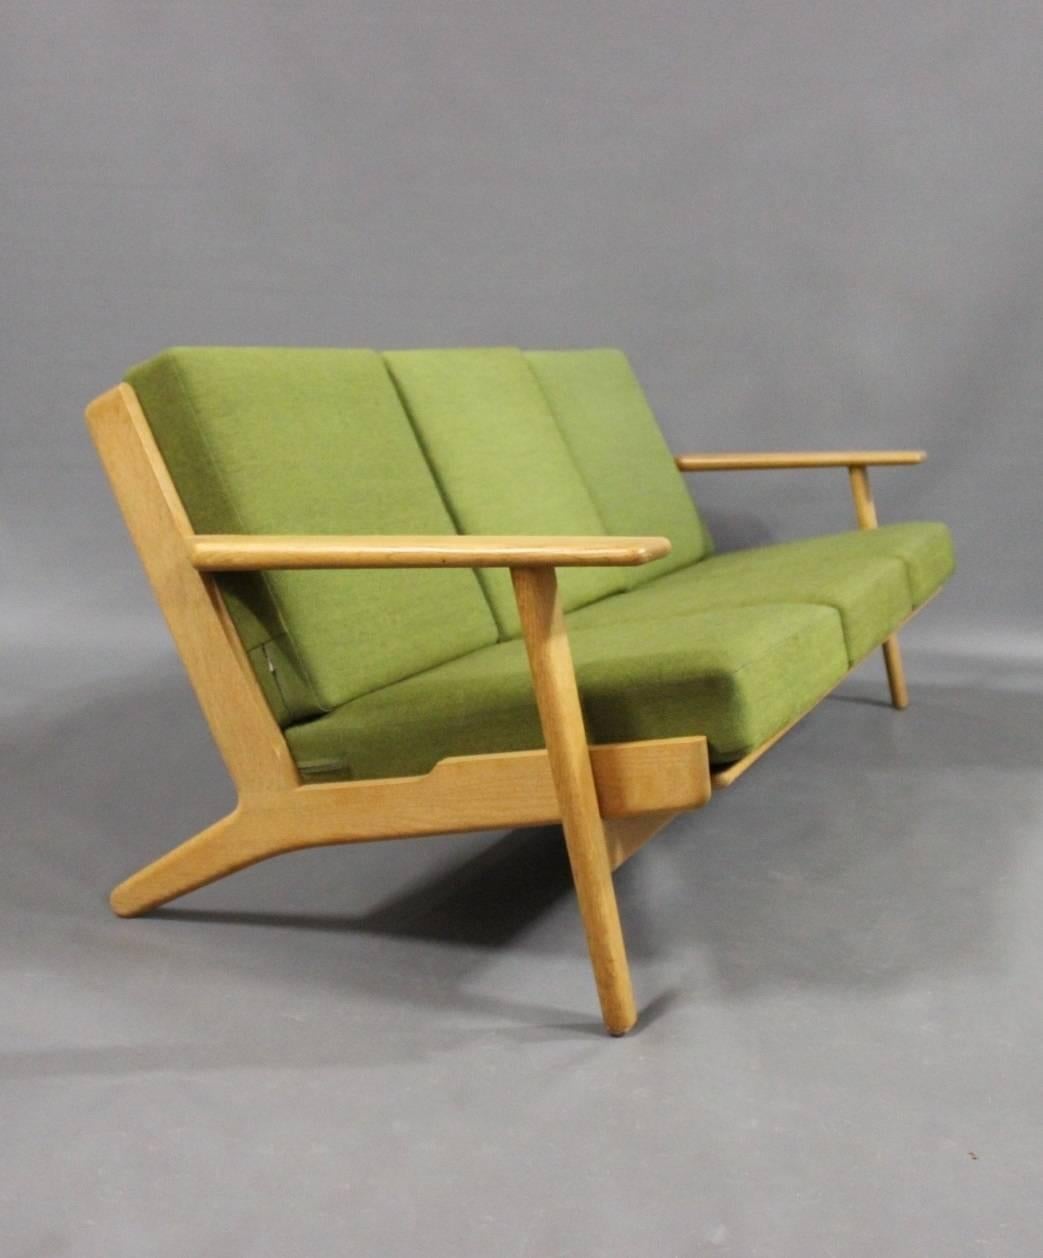 Three-seat sofa, model GE290, in oak and green Hallingdal wool. Designed by Hans J. Wegner in 1953 and manufactured by GETAMA in the 1960s.